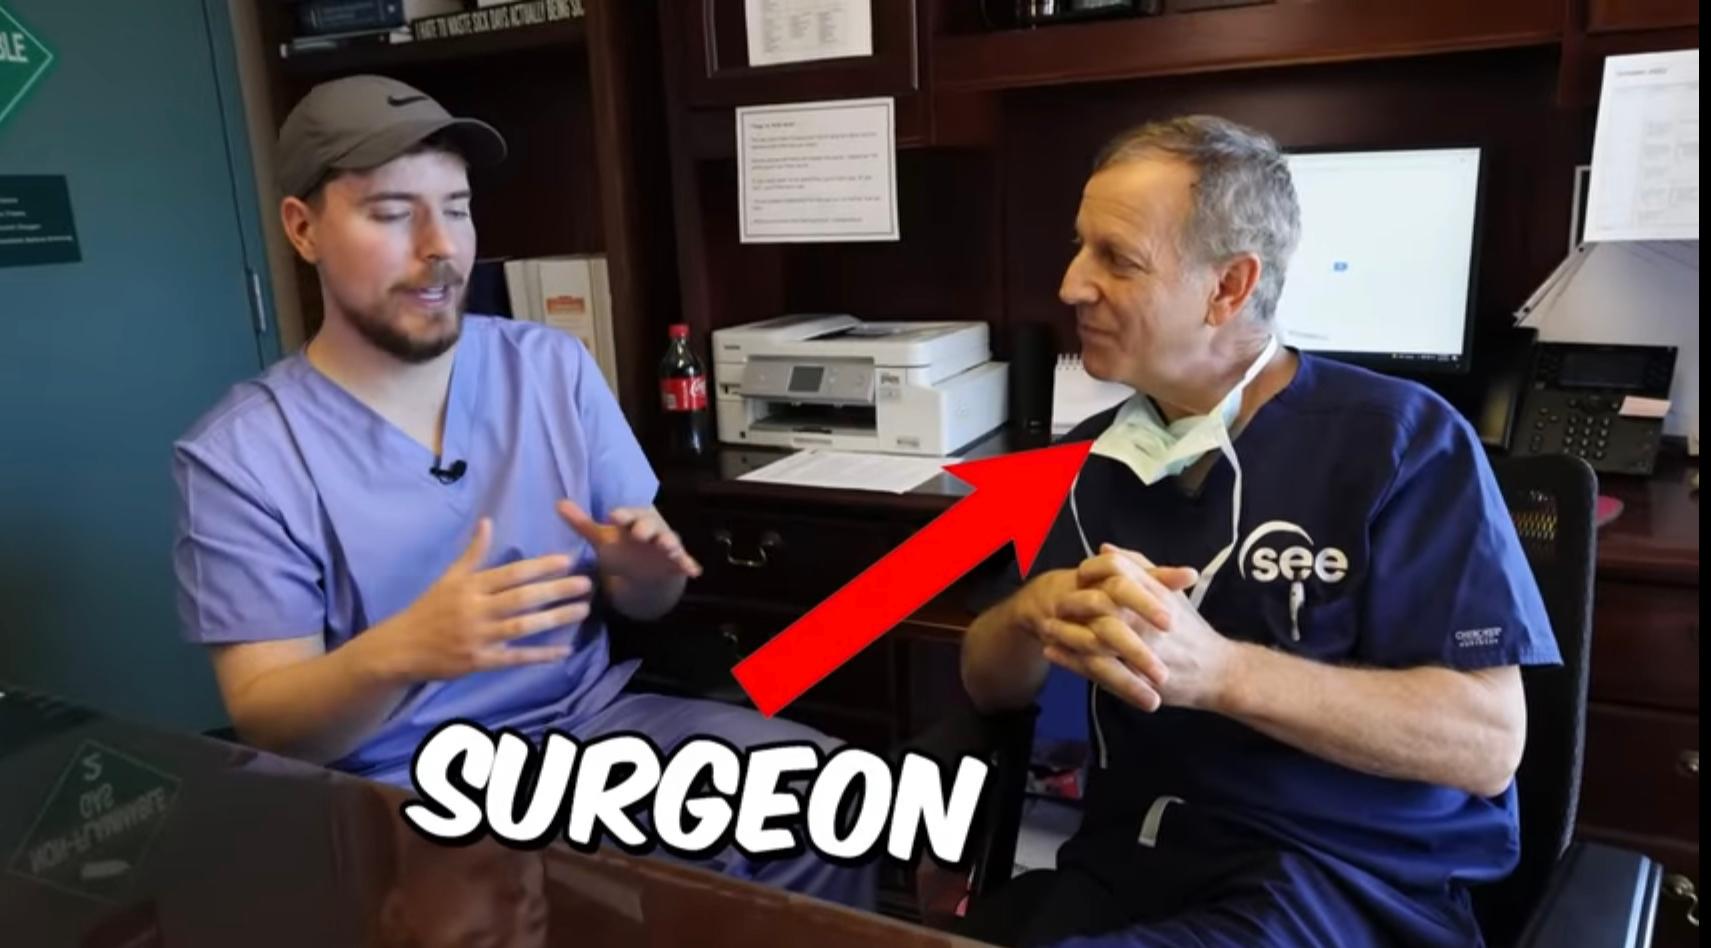 MrBeast and Dr. Levenson